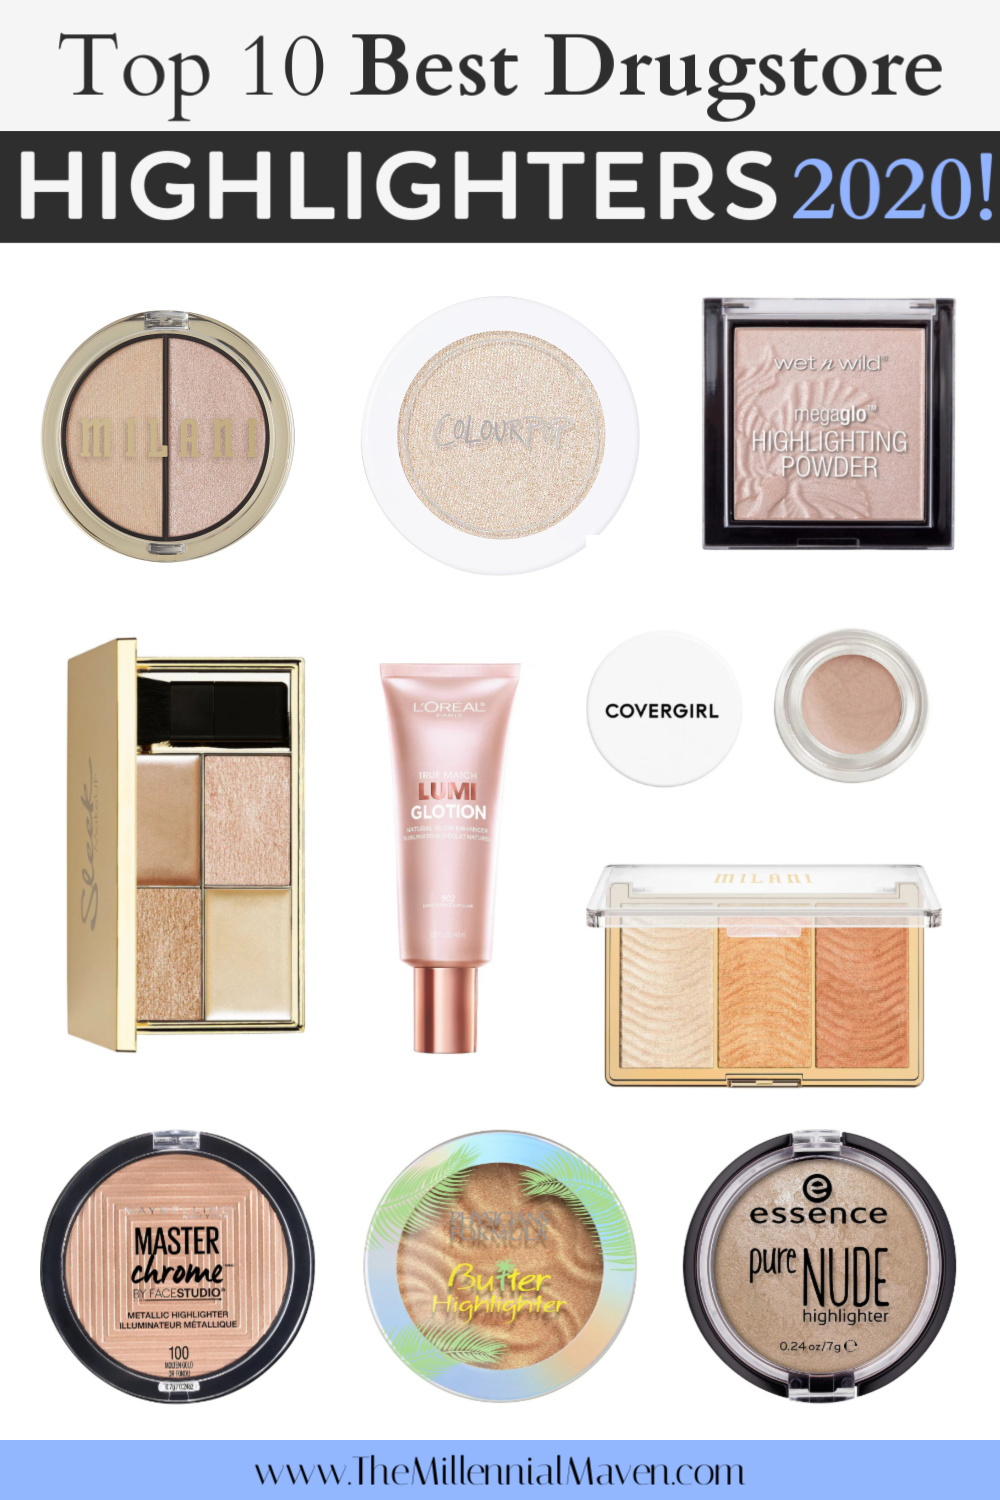 Found: The 10 Best Drugstore Highlighters Money Can Buy